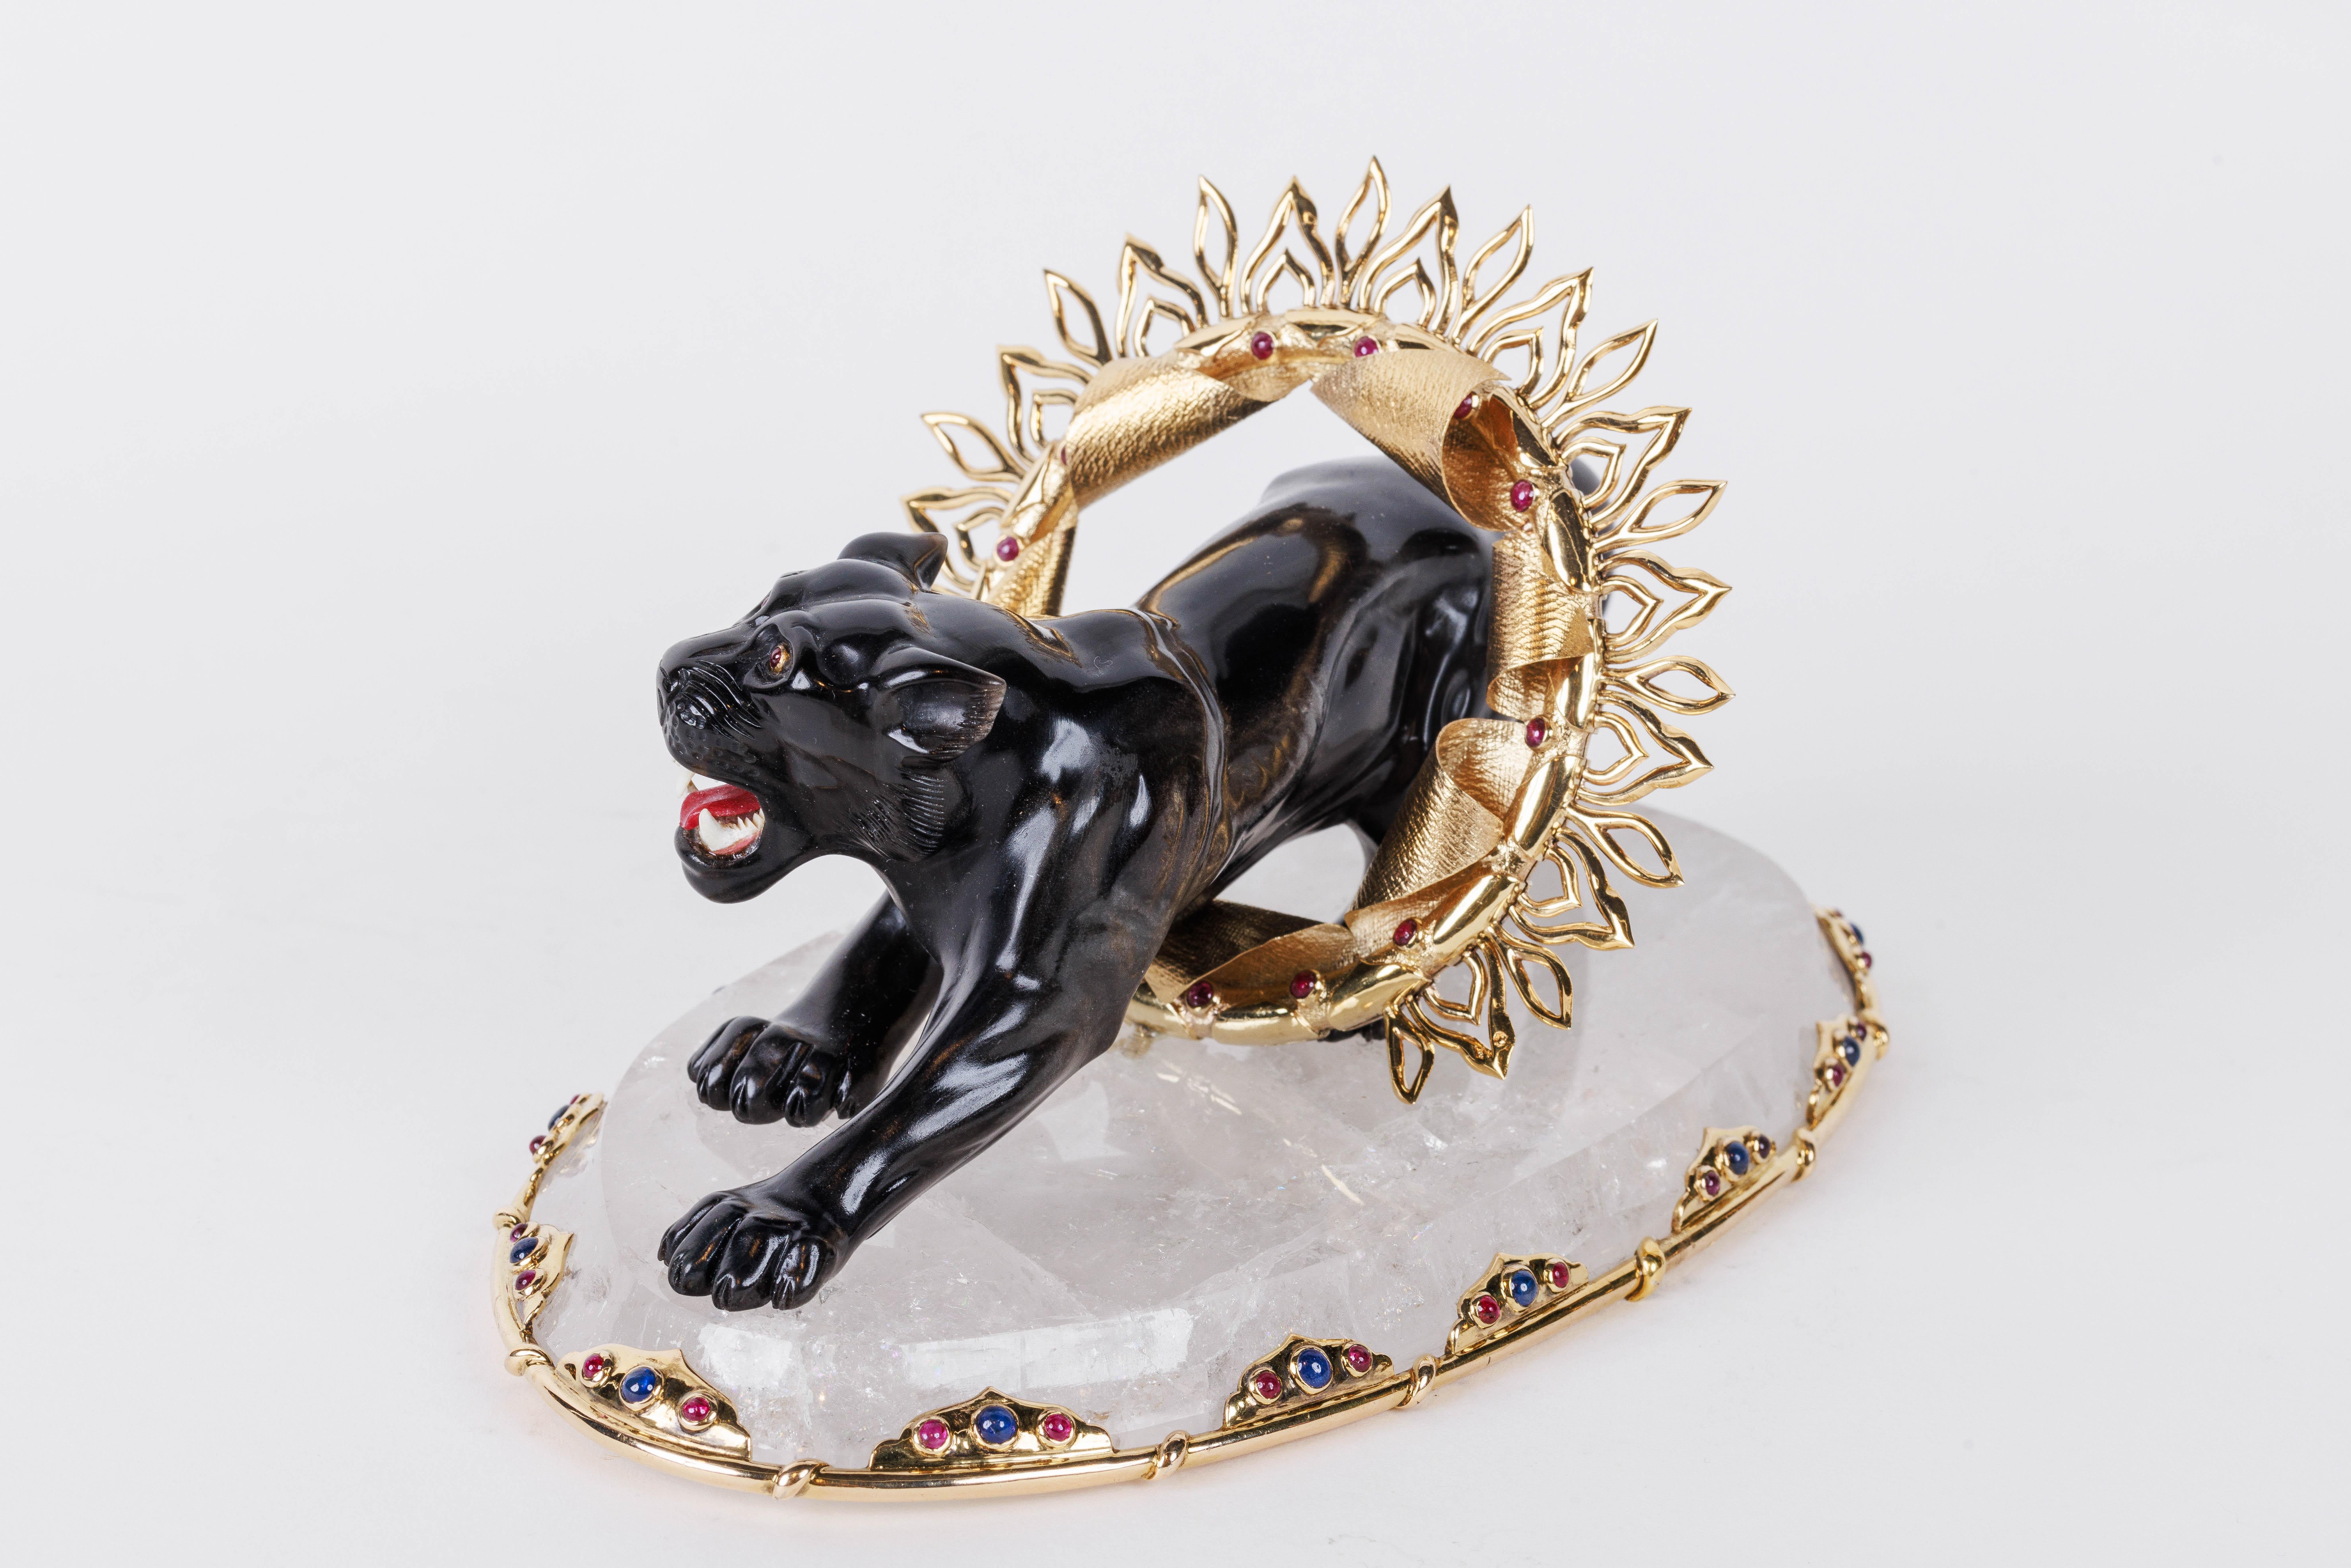 Single Cut Alexandre Reza, Rare Obsidian, Silver-Gilt, and Rock Crystal Circus Panther For Sale